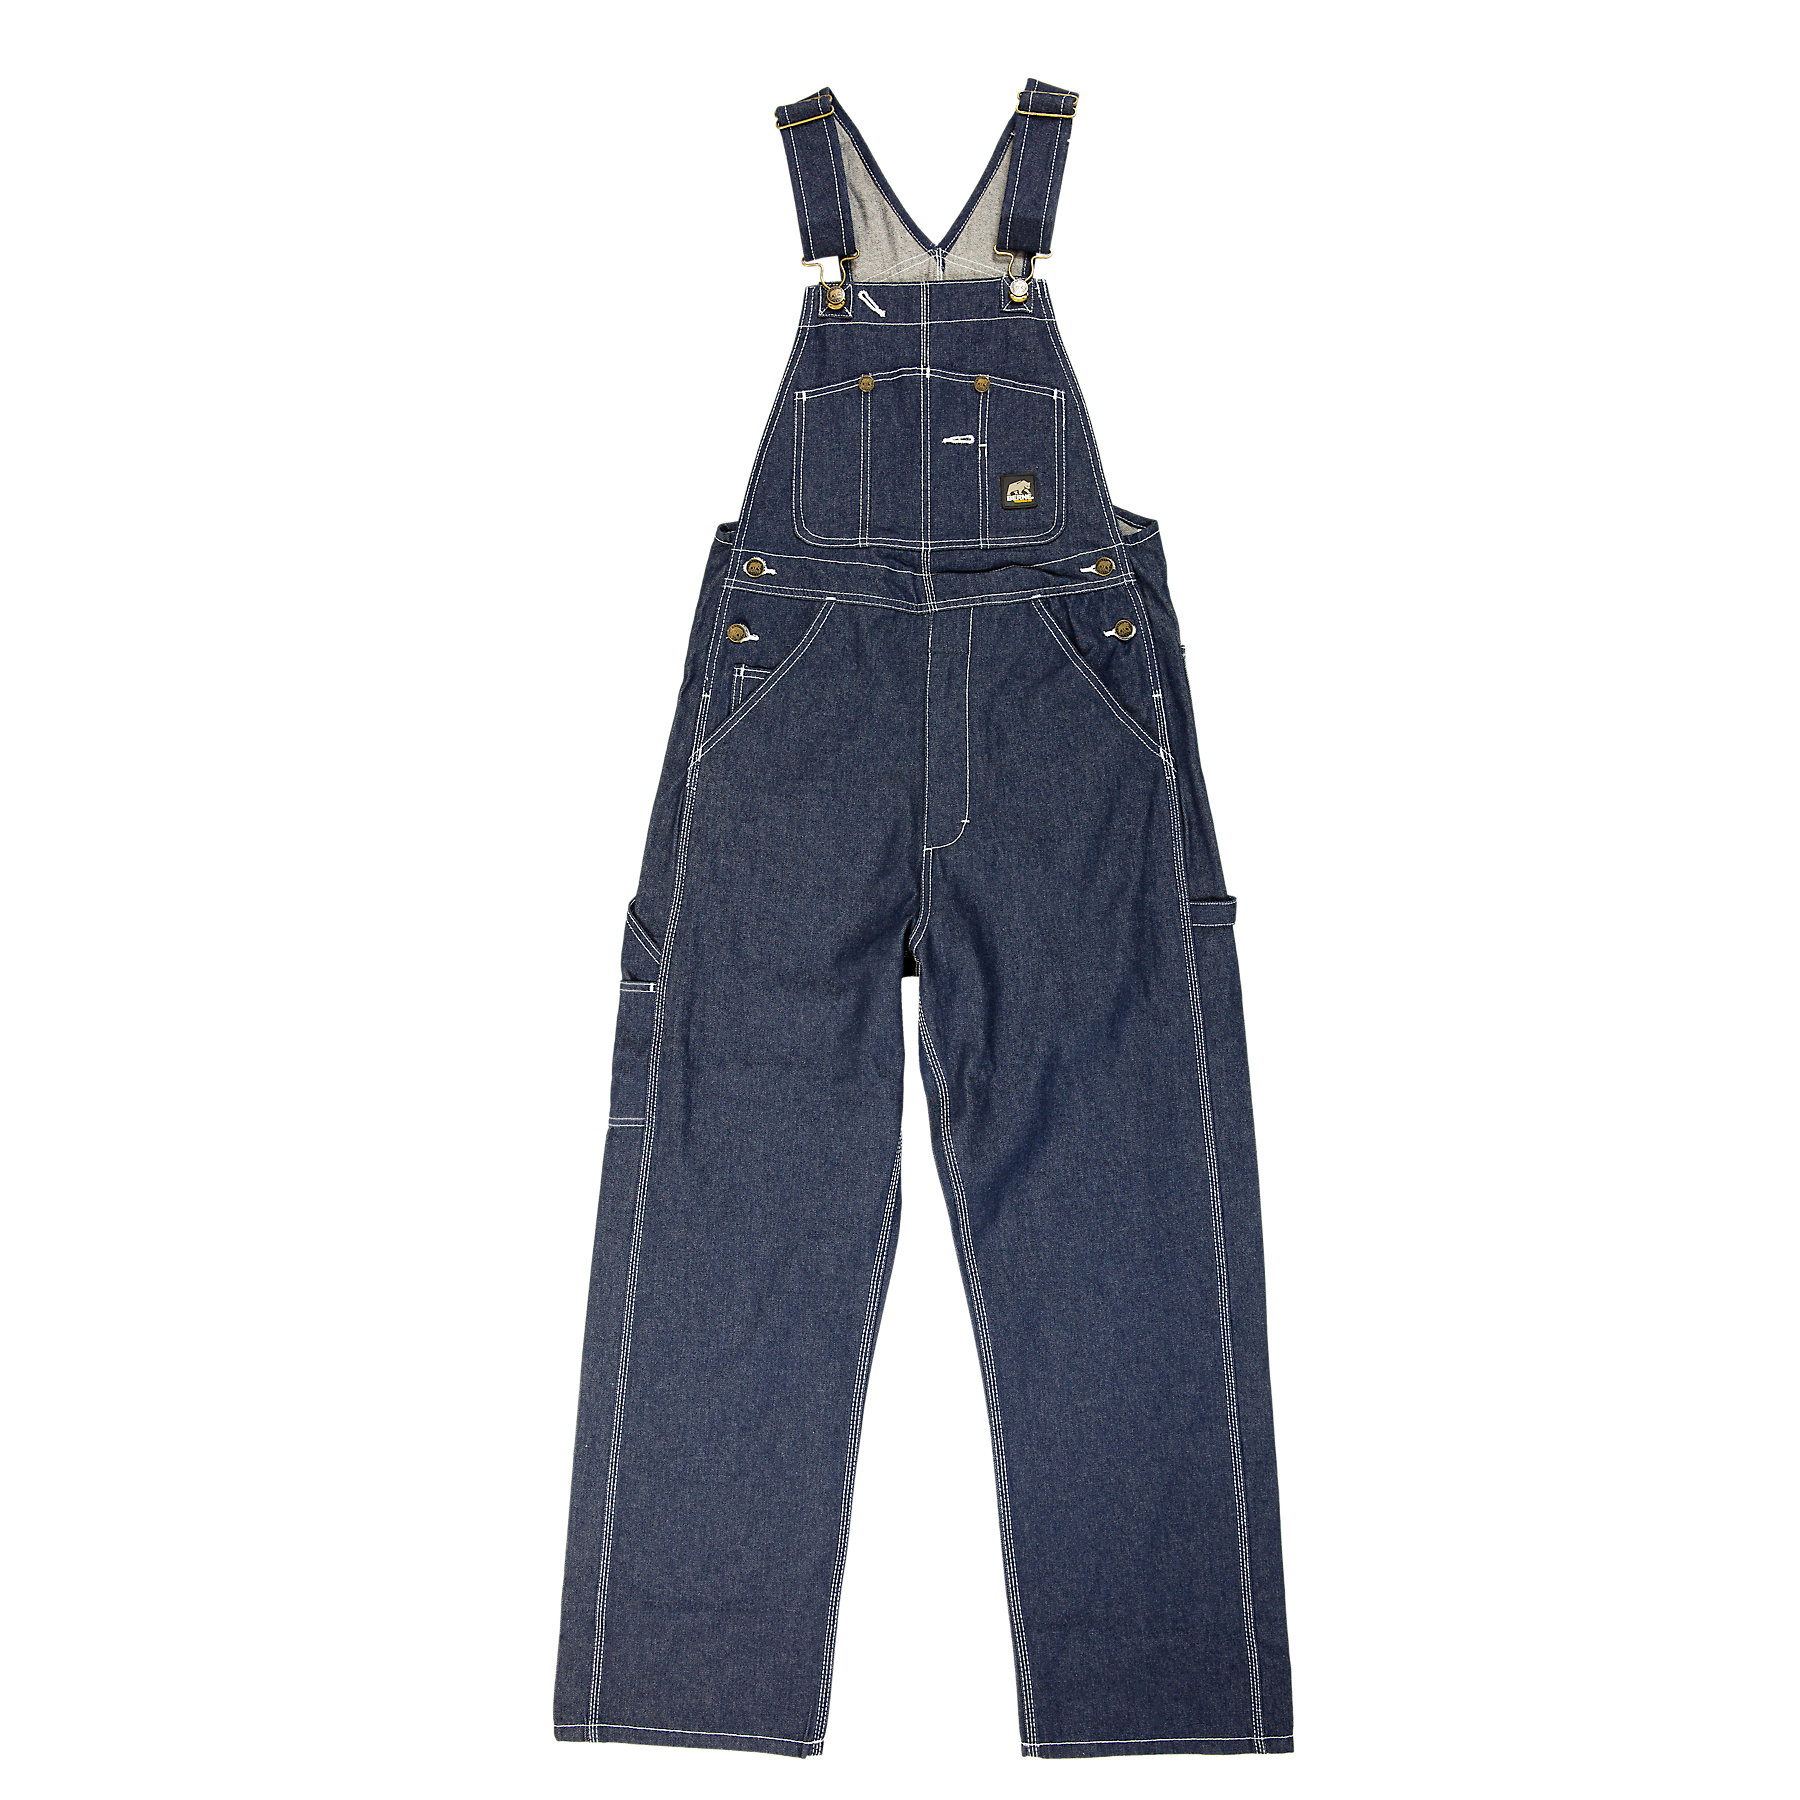 Berne Overalls Size Chart